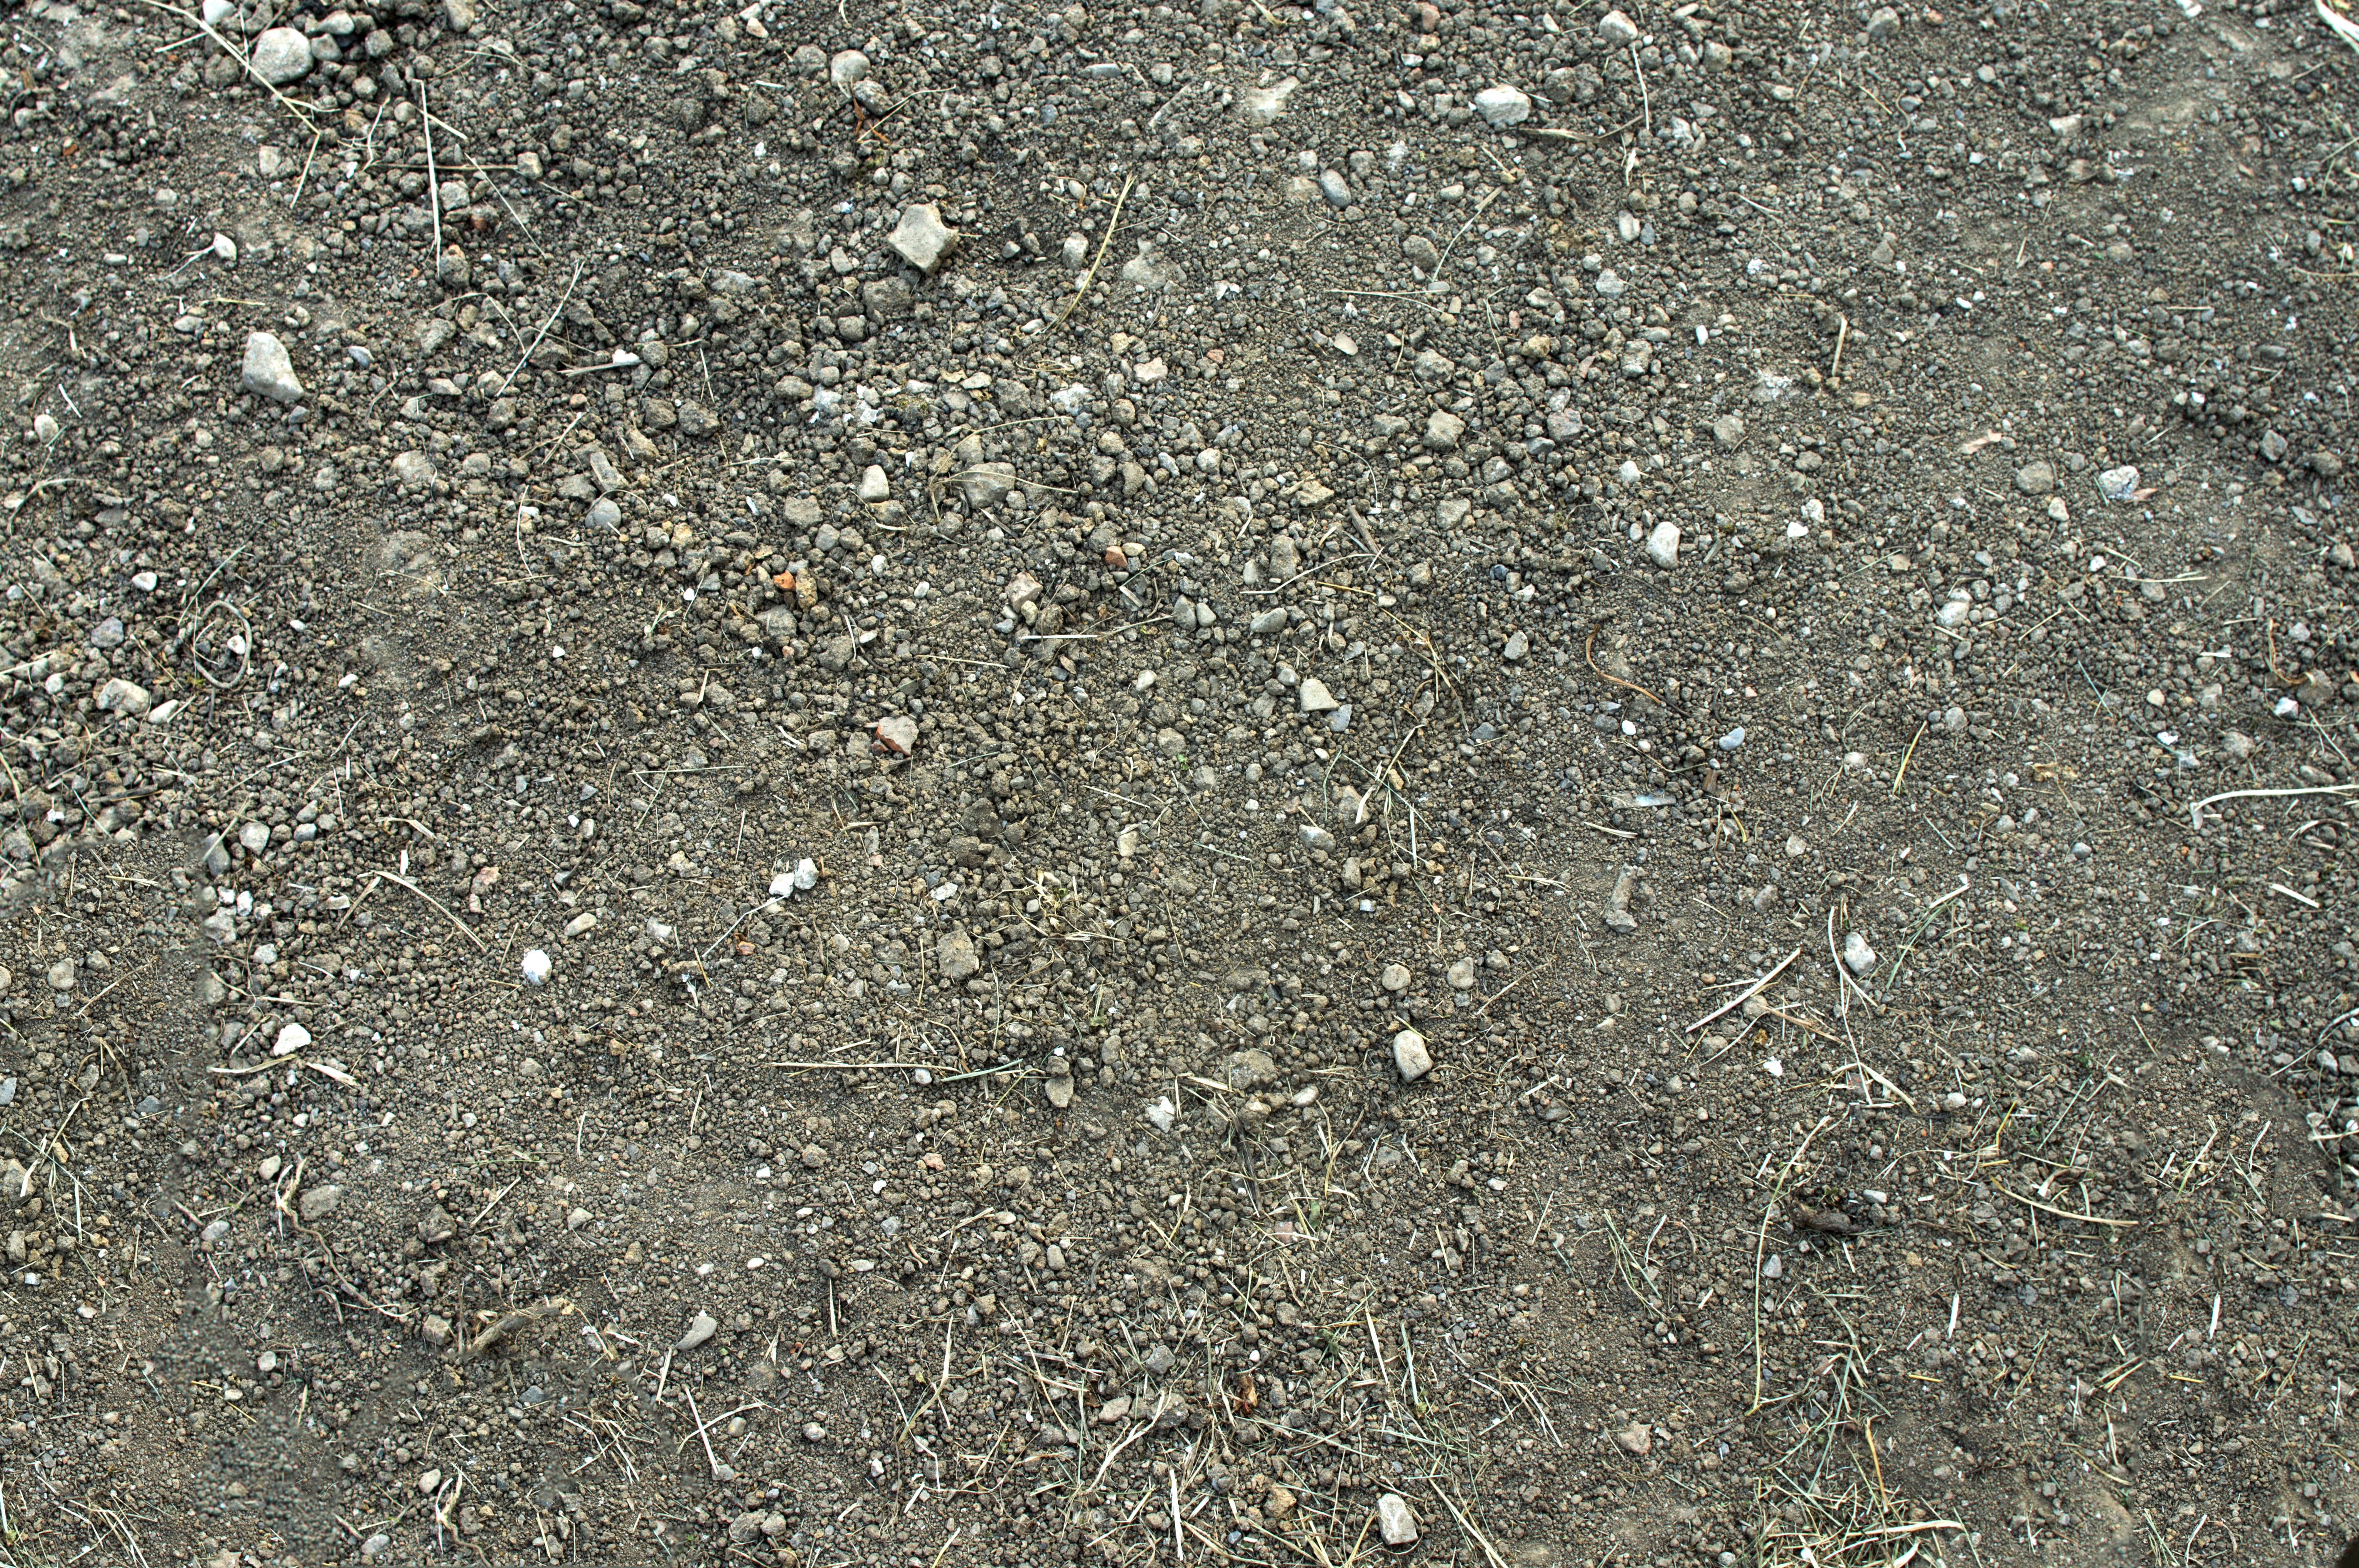 photo of gray soil at daytime, ground, earth, clay, nature, texture